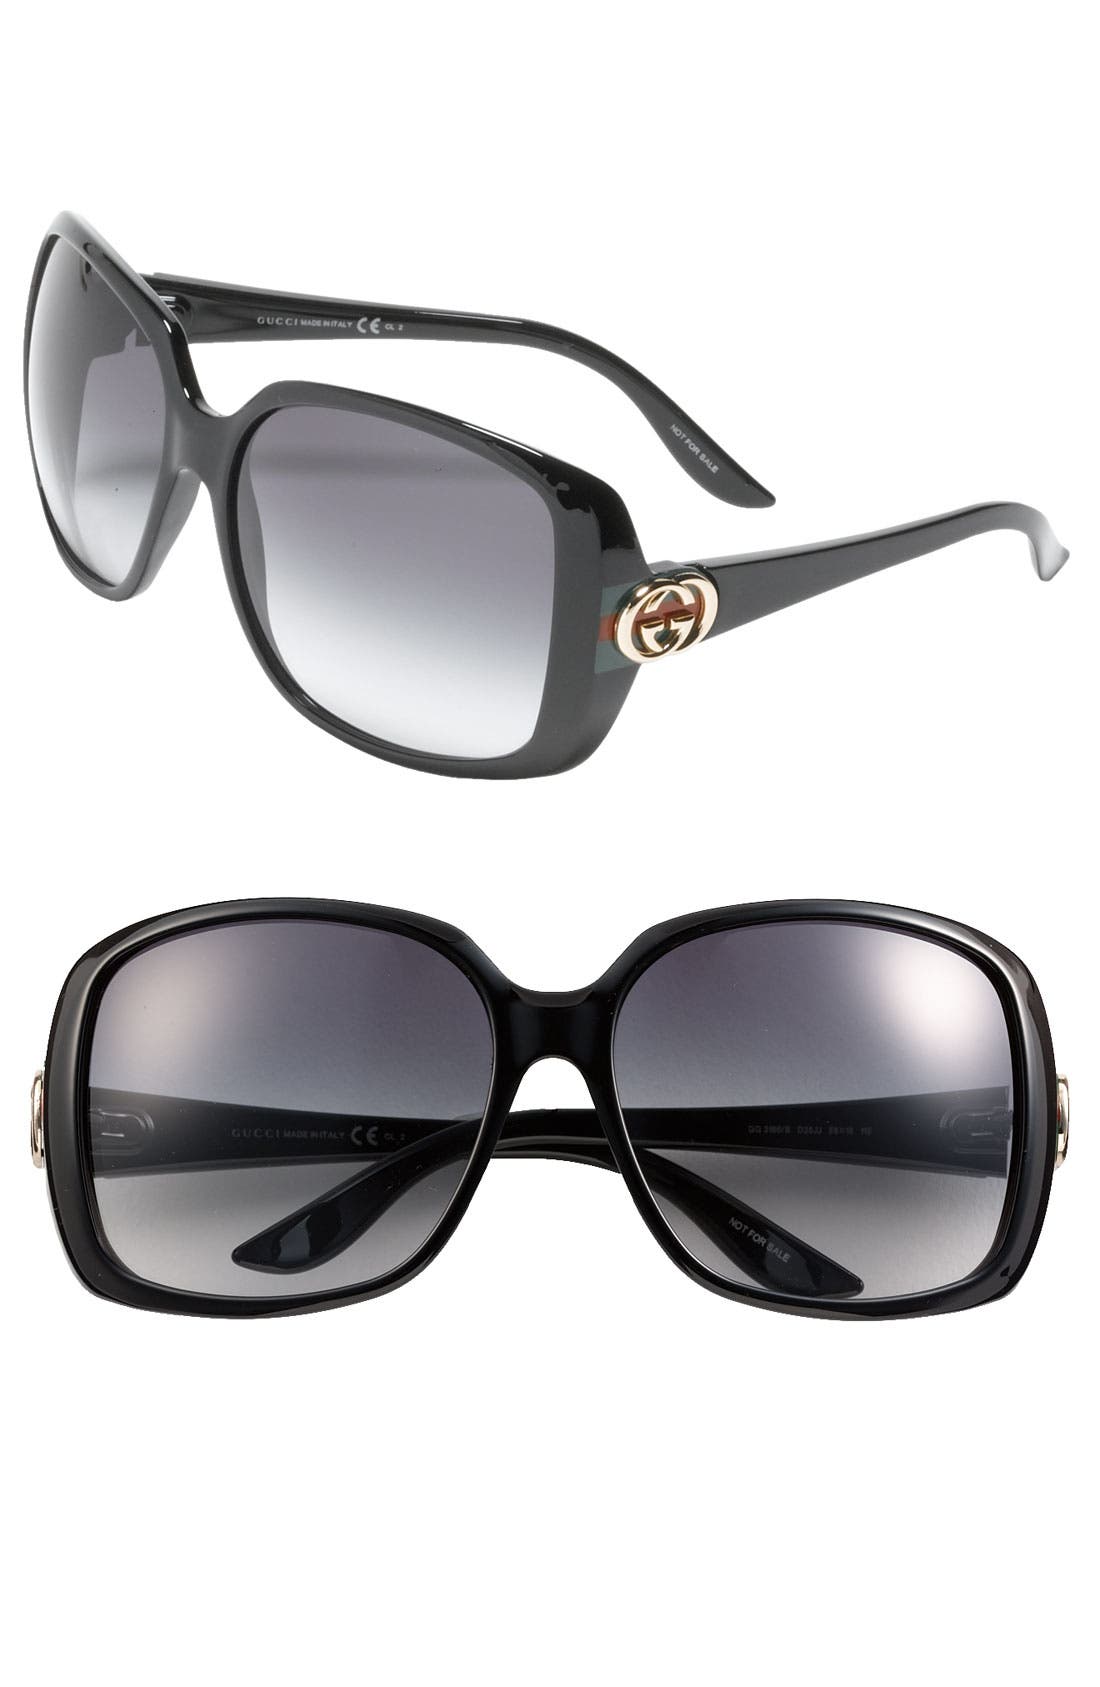 gucci shades nordstrom